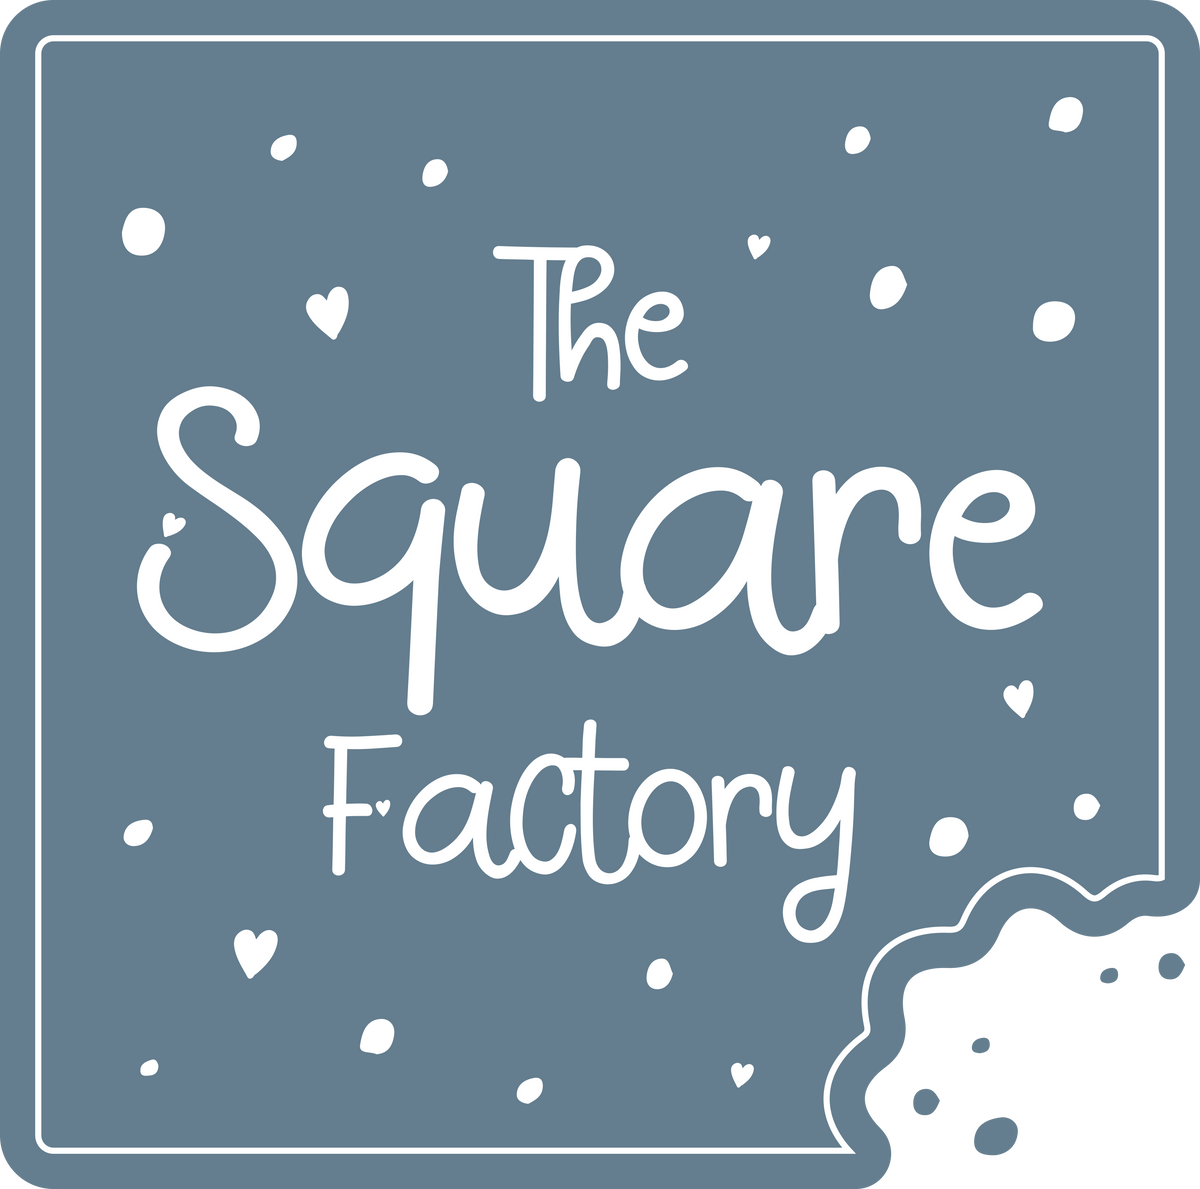 The Square Factory